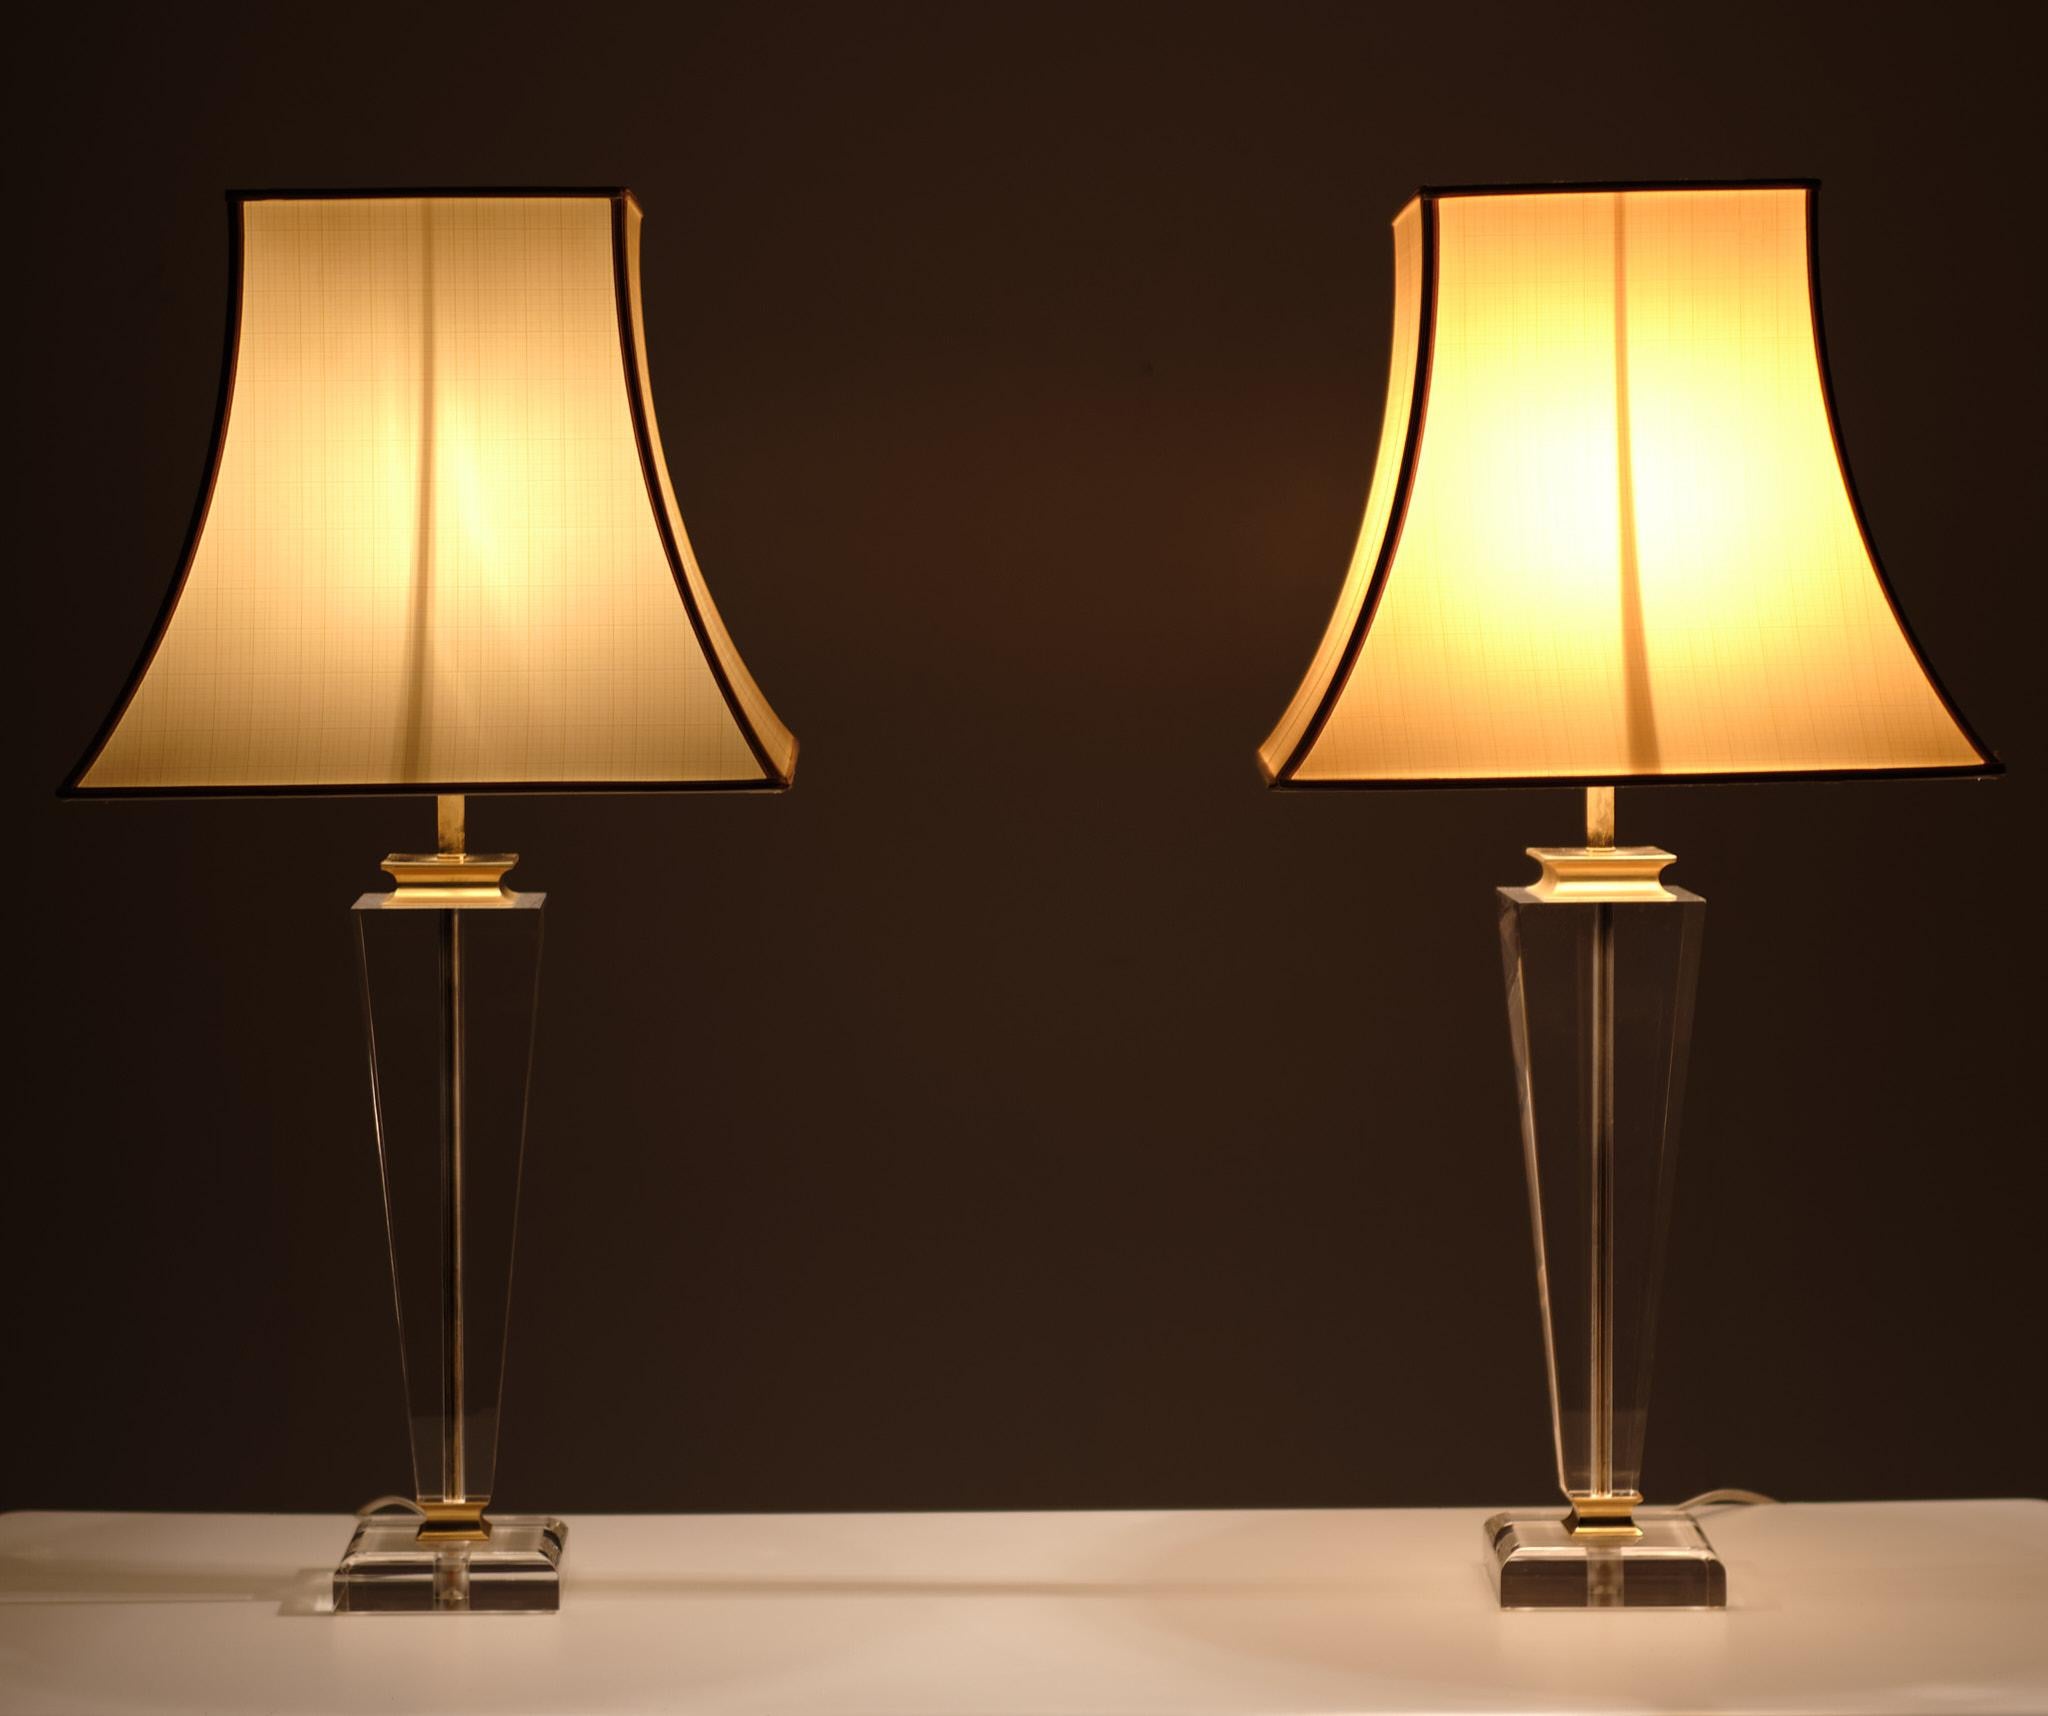 Hollywood Regency Parigi  Lucite table lamps  1970s Italy  For Sale 3